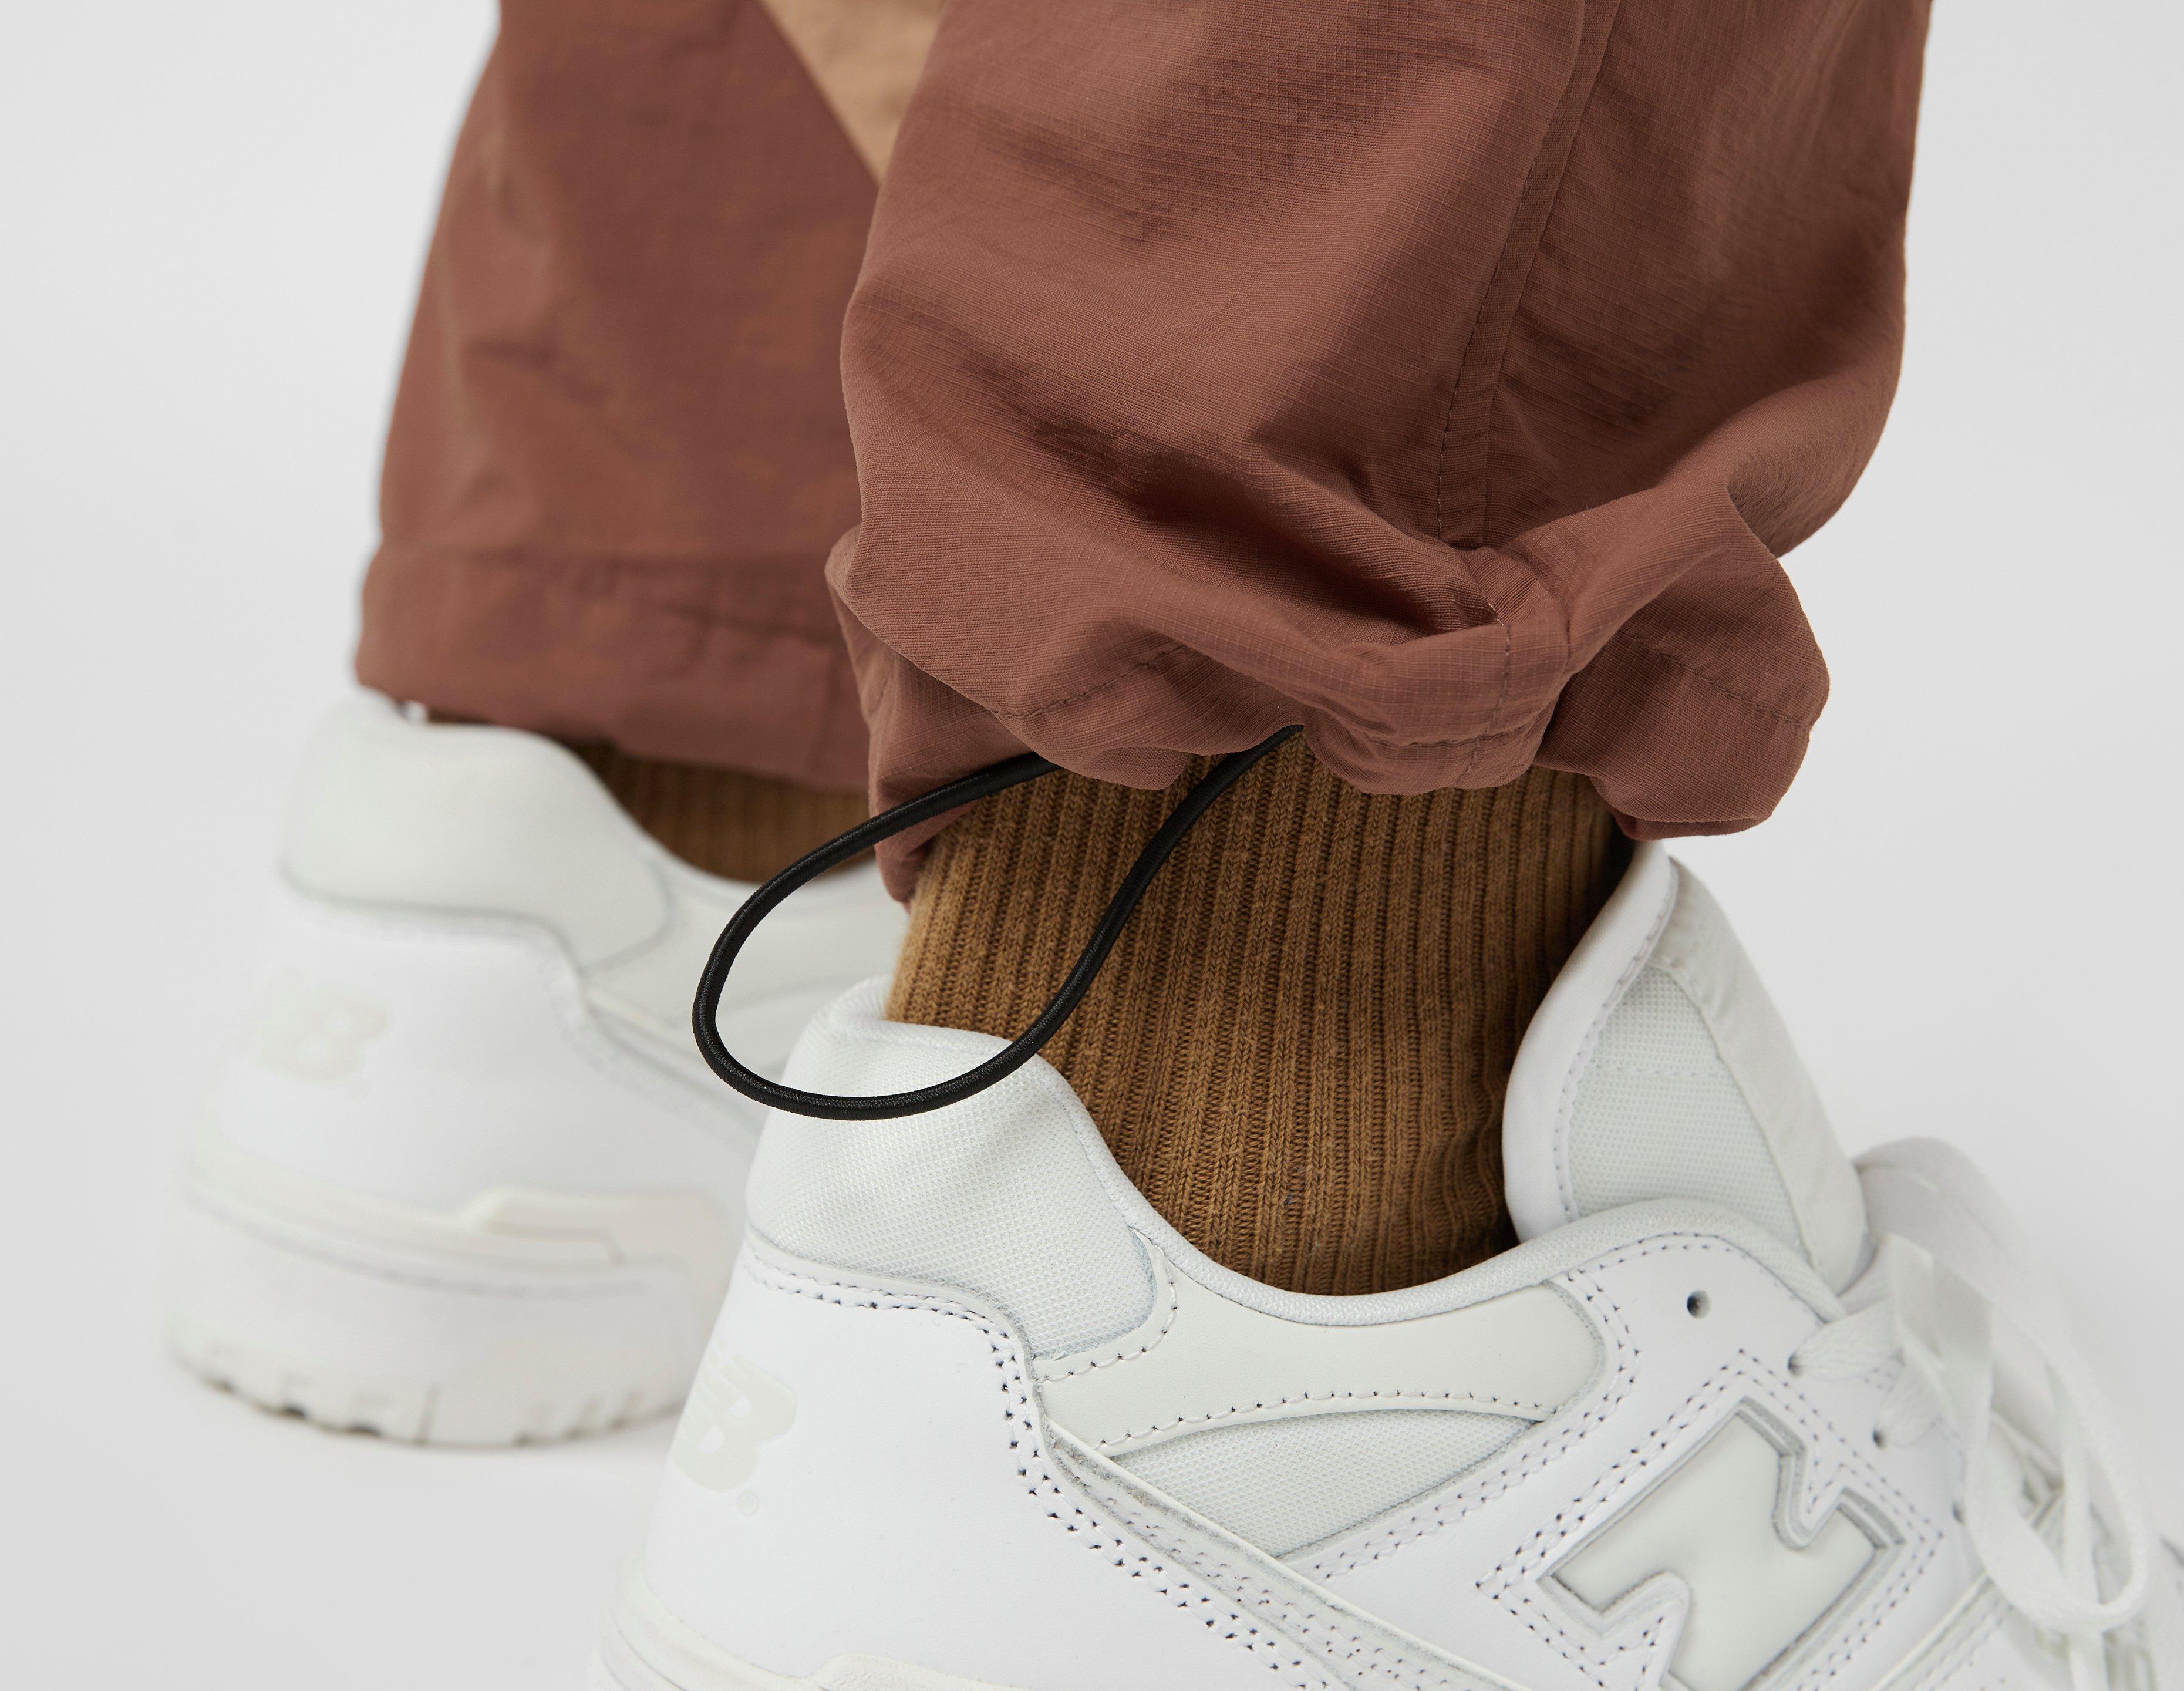 Brown New Balance 90's Running Track Pants - size? exclusive